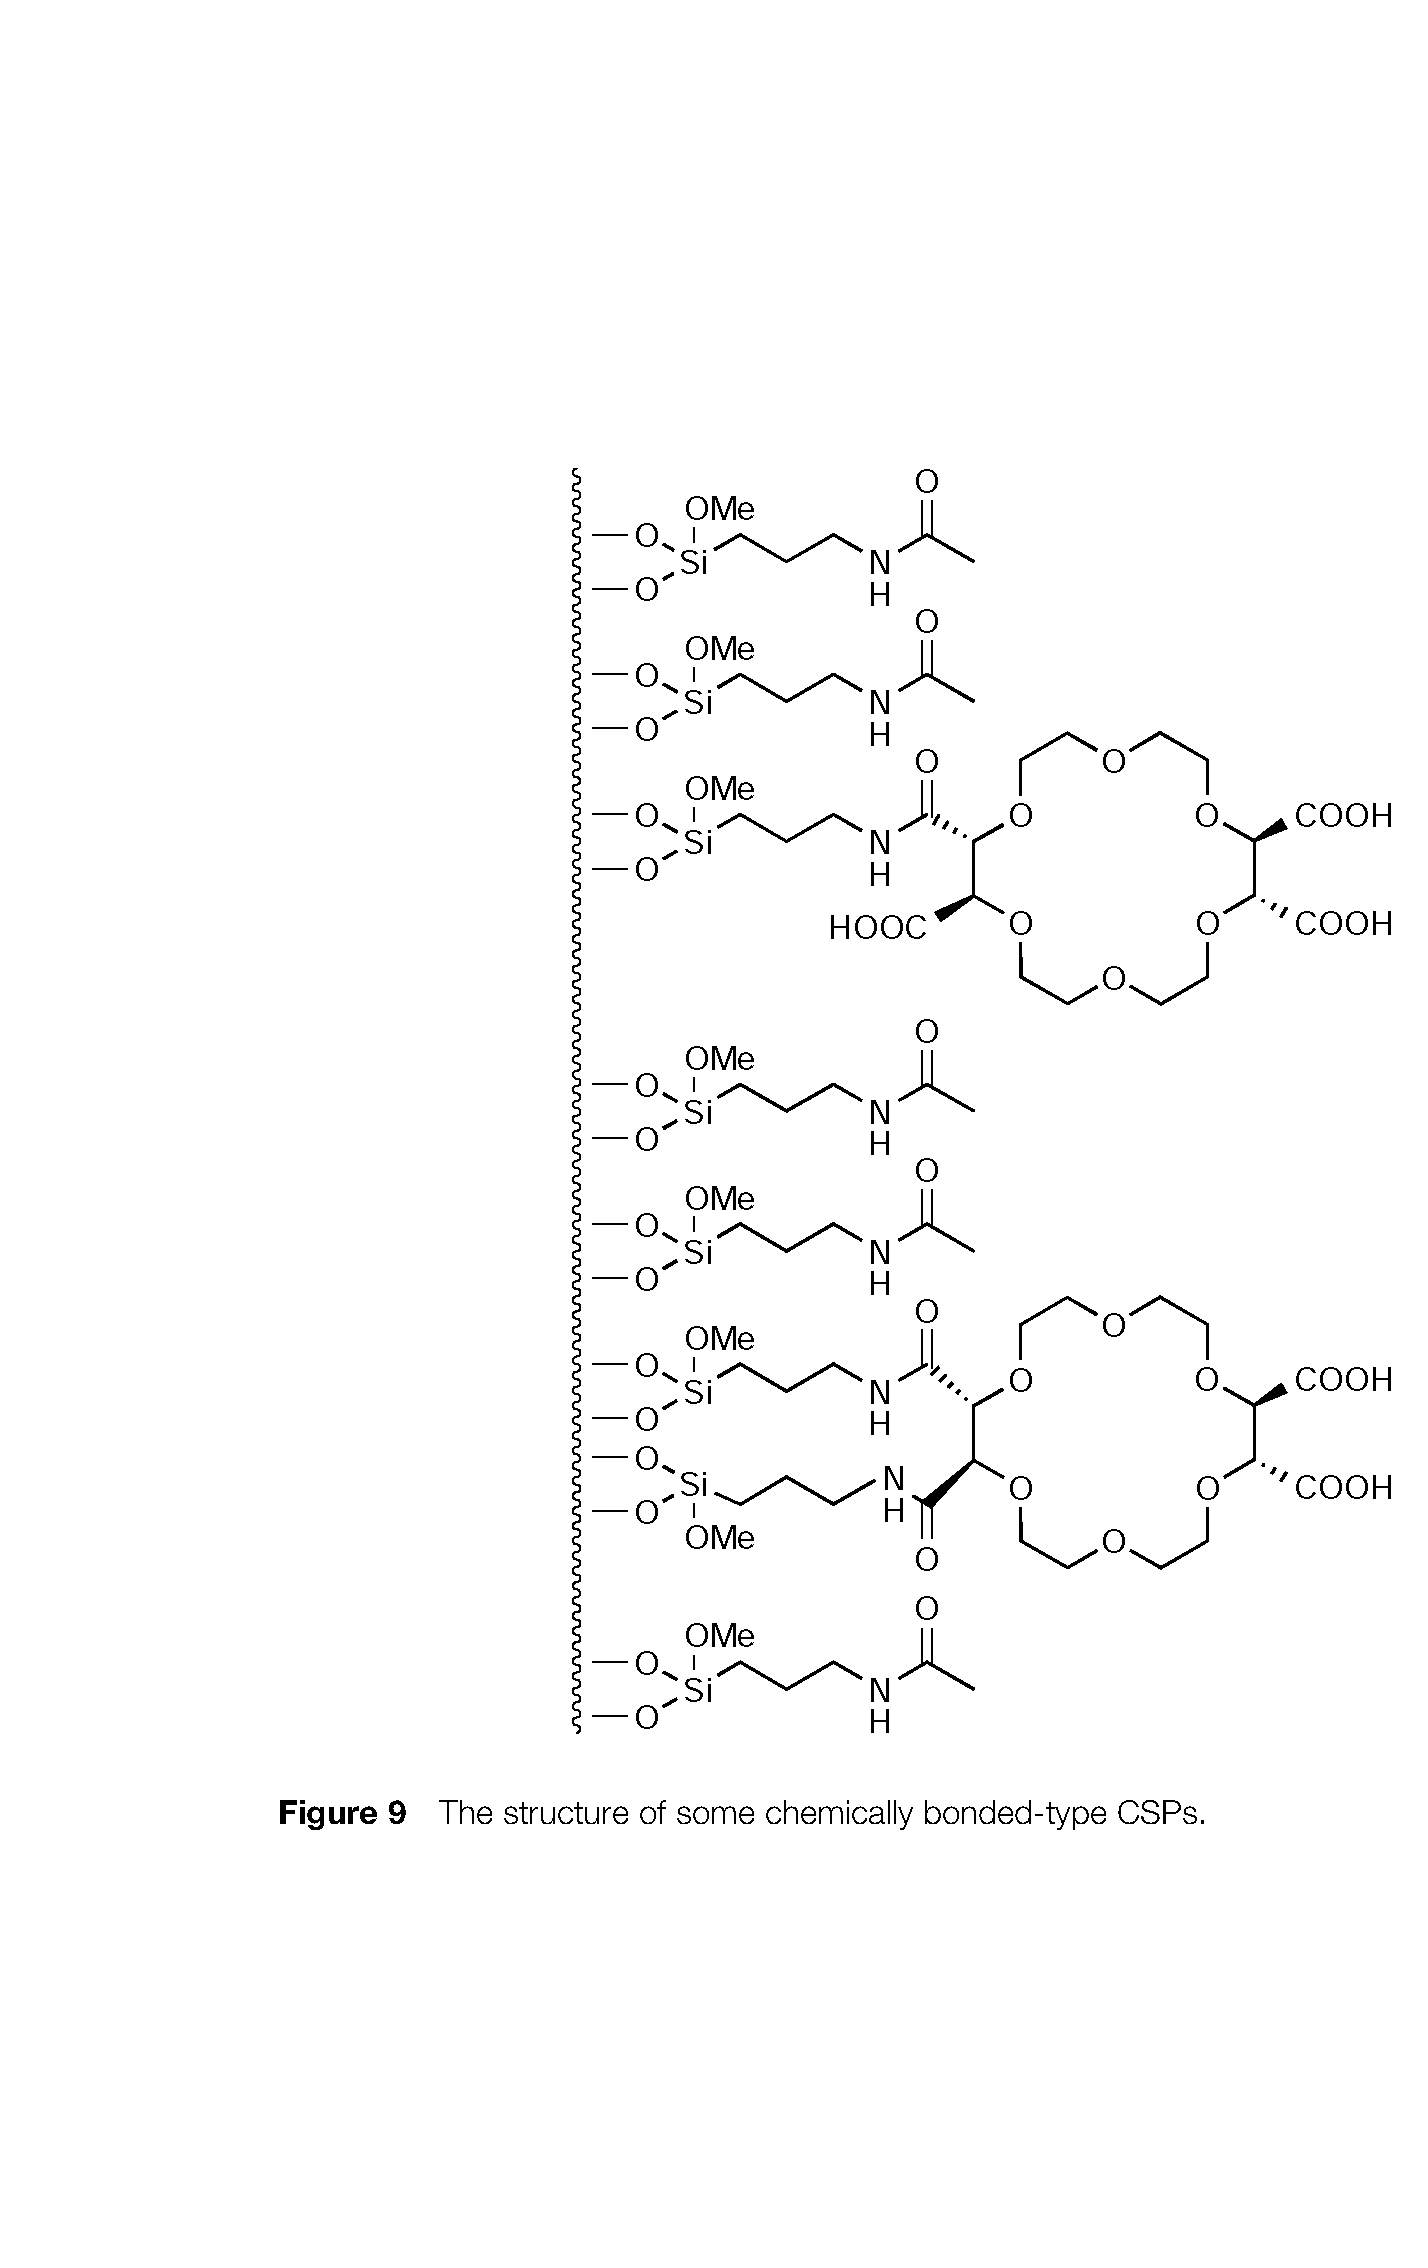 Figure 9 The structure of some chemically bonded-type CSPs.